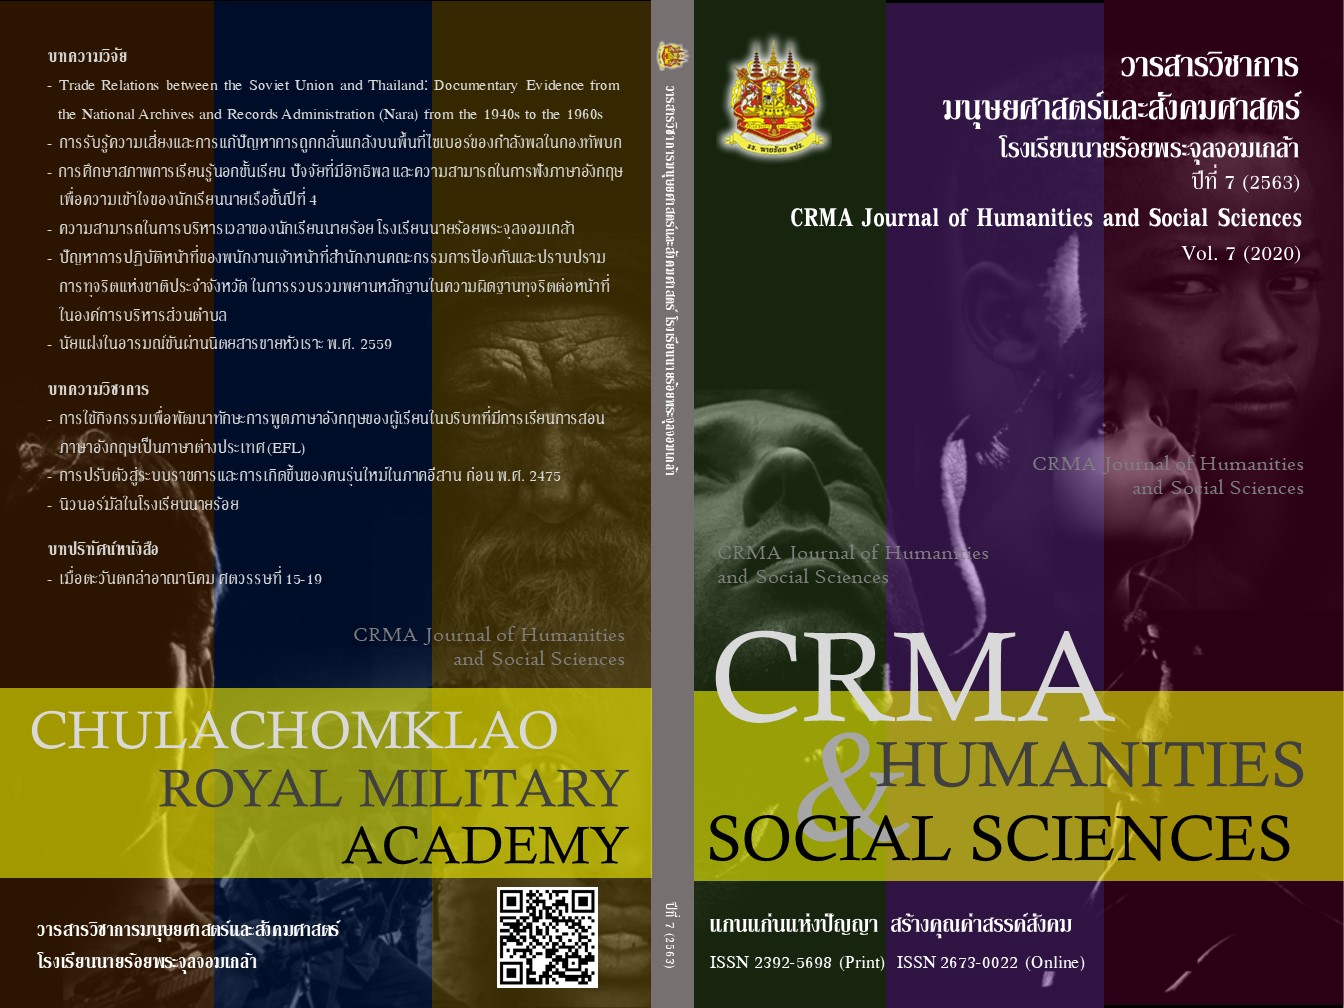 					View Vol. 7 (2020): CRMA Journal of Humanities and Social Sciences
				